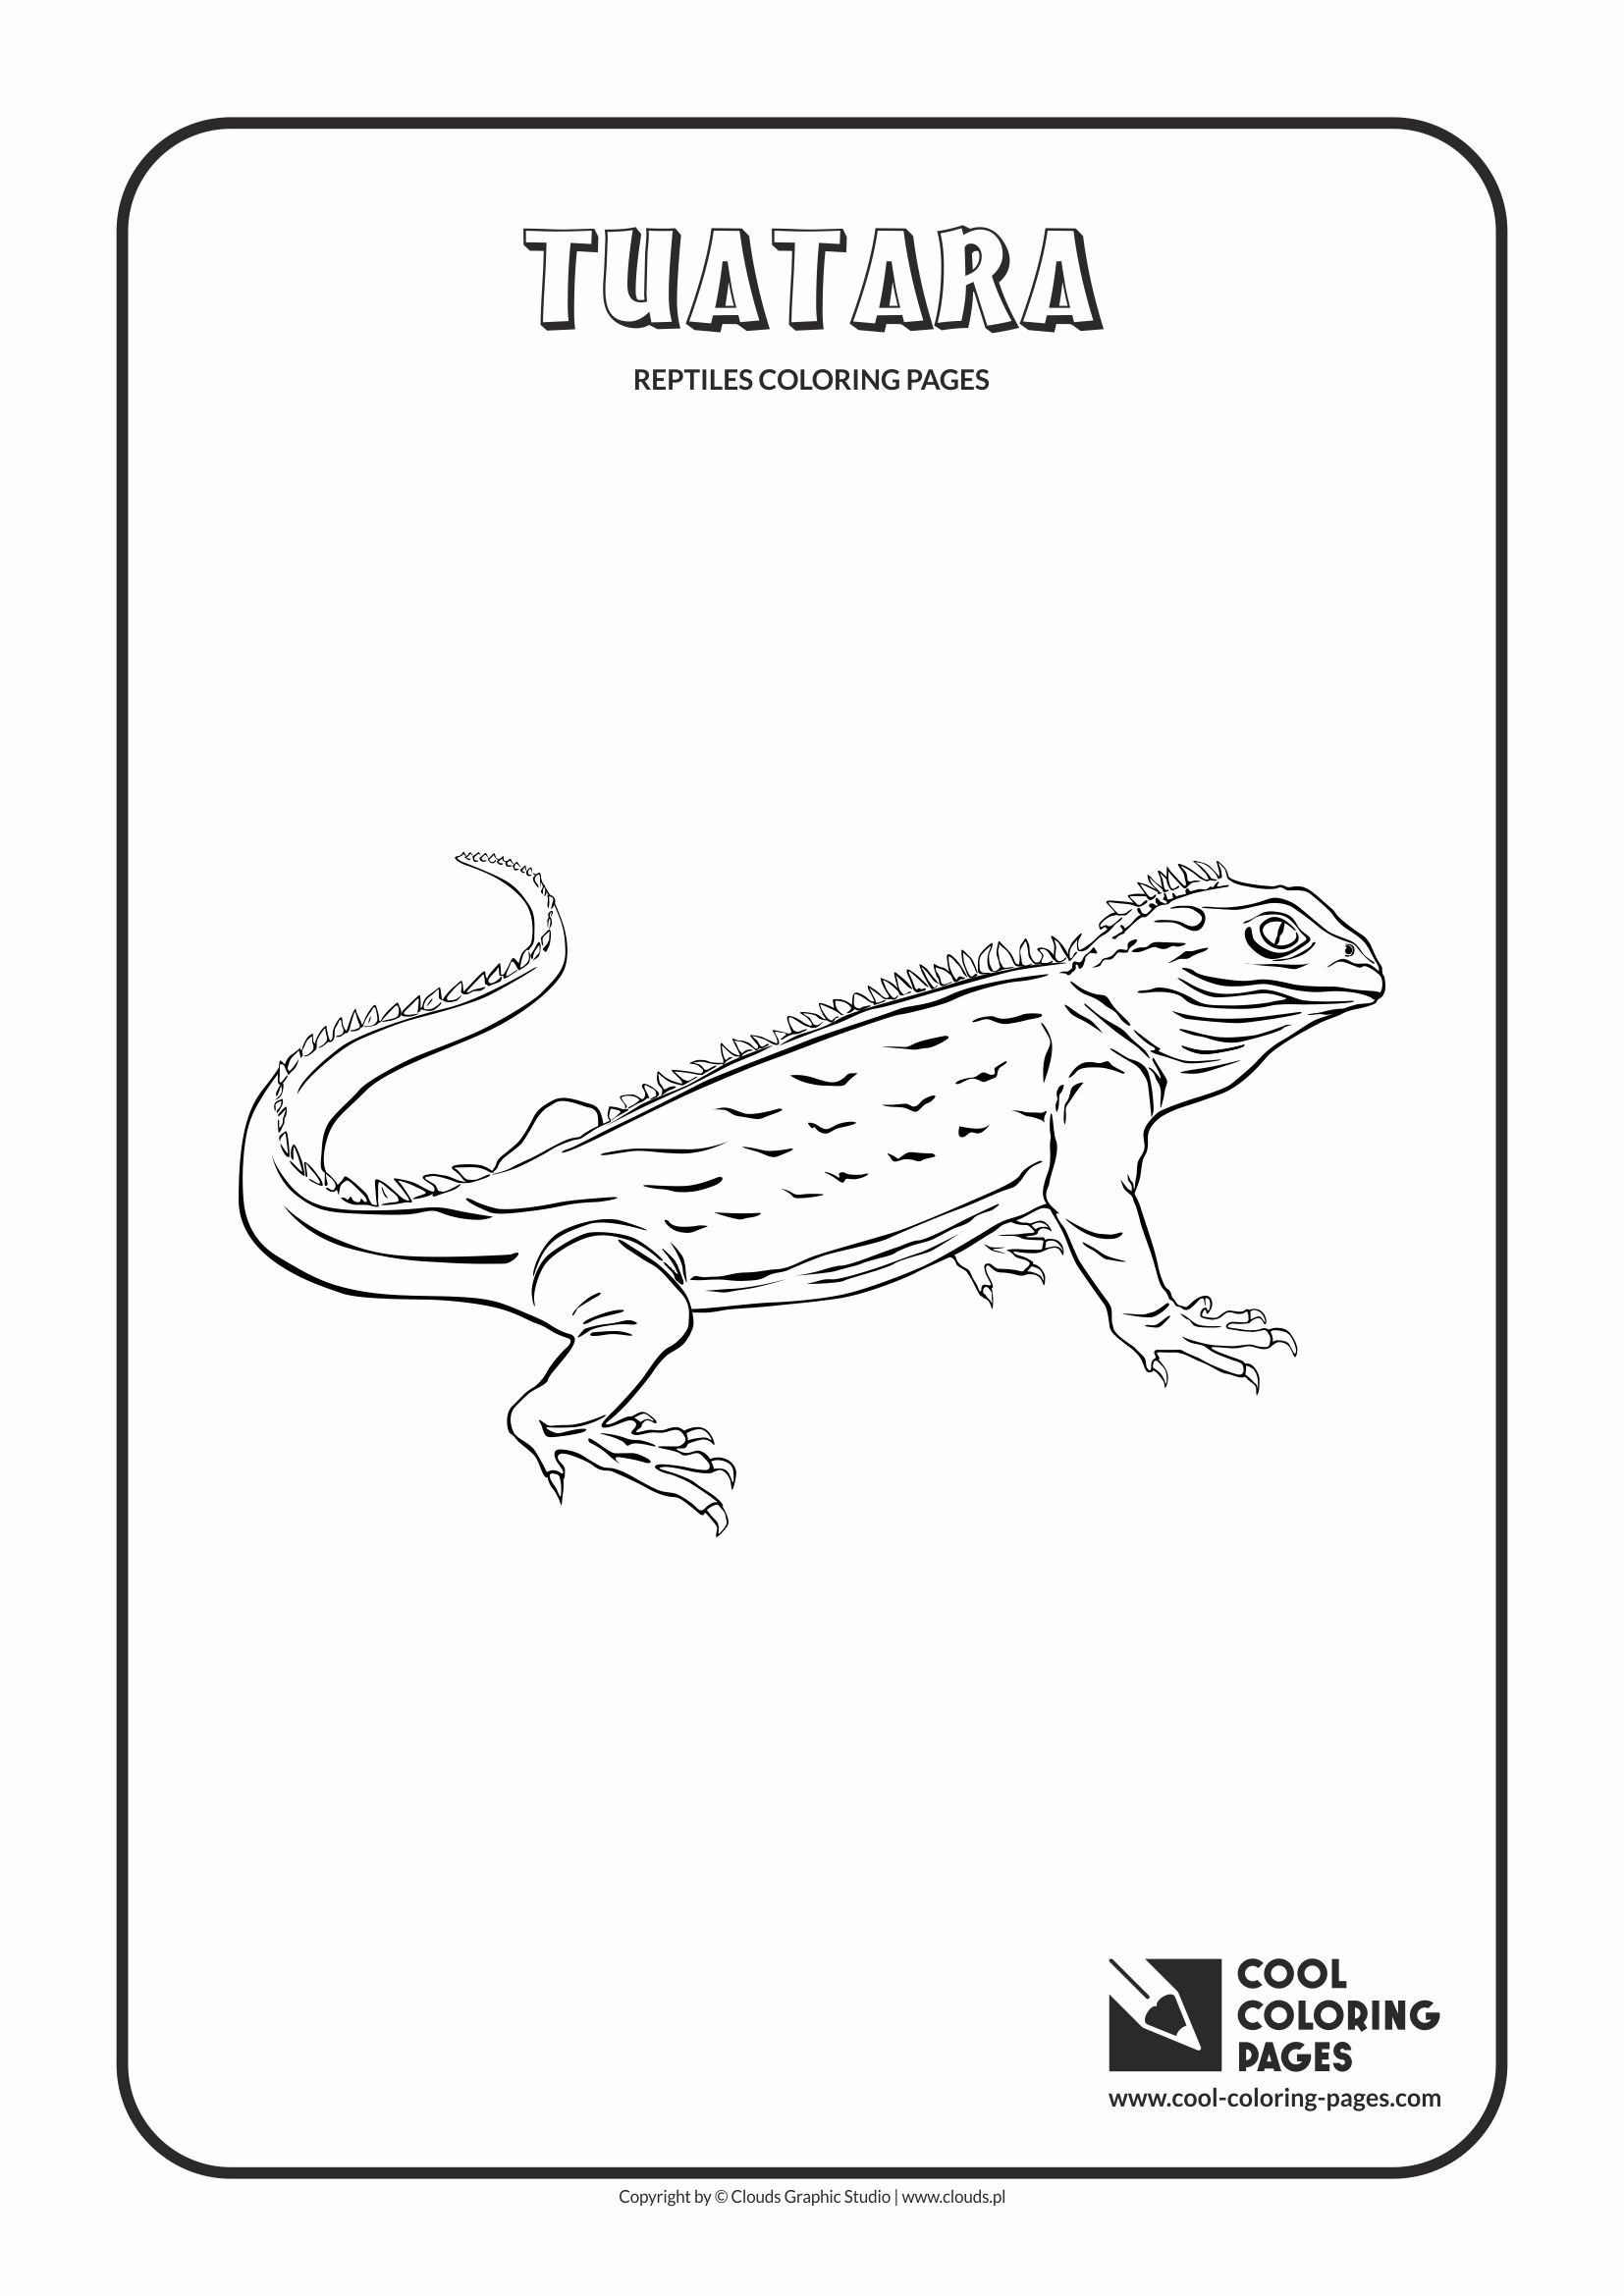 Cool coloring pages tuatara coloring page